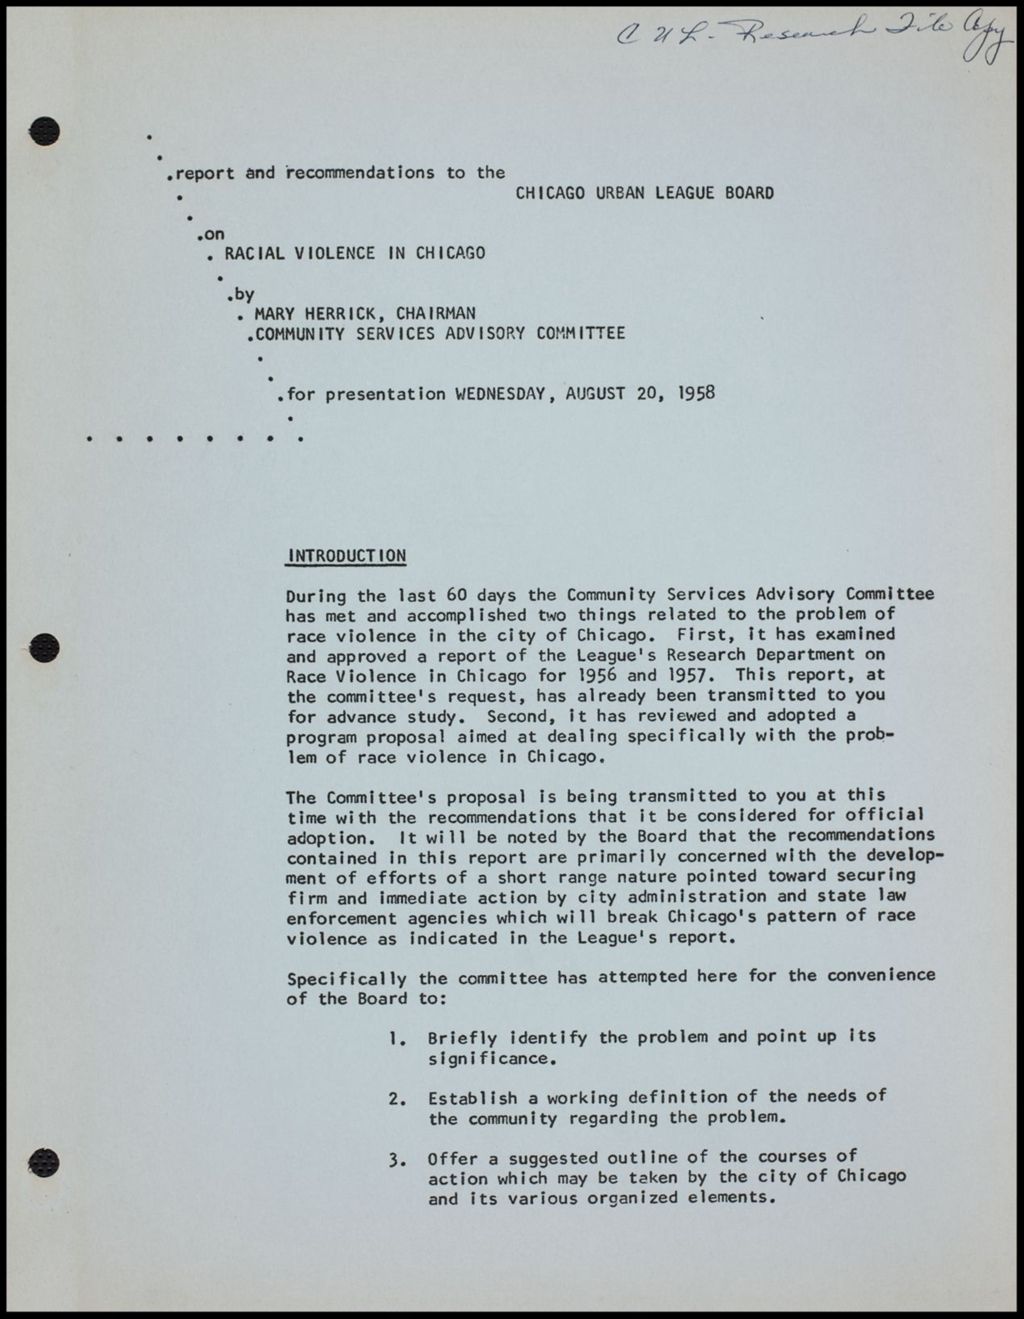 Urban League Research Statements and Reports, 1959 (Folder III-2464)